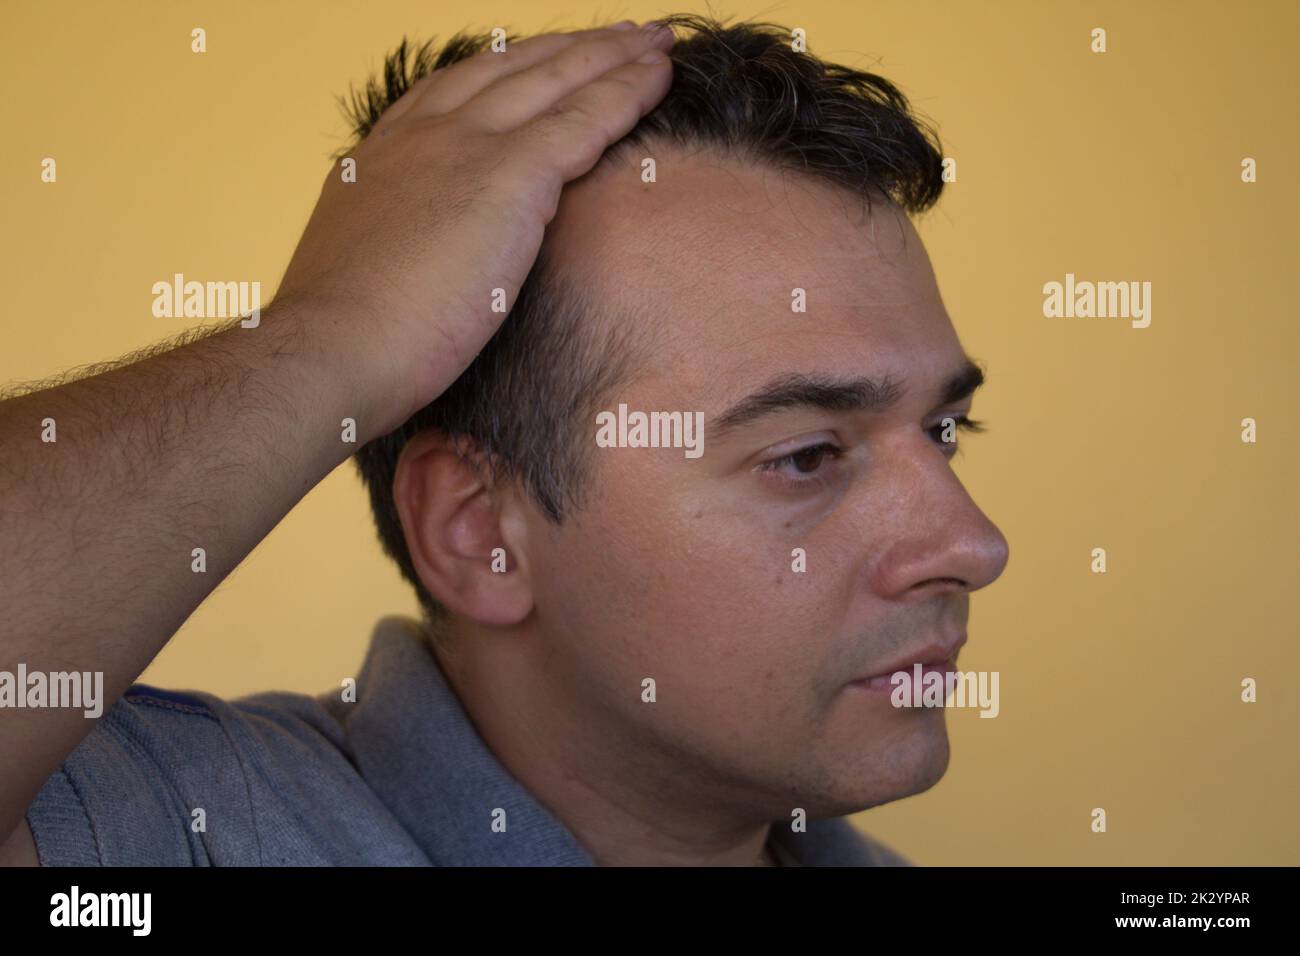 Image of a man showing the onset of hair loss and the principle of receding hairline. Possible causes and remedies for hair loss Stock Photo